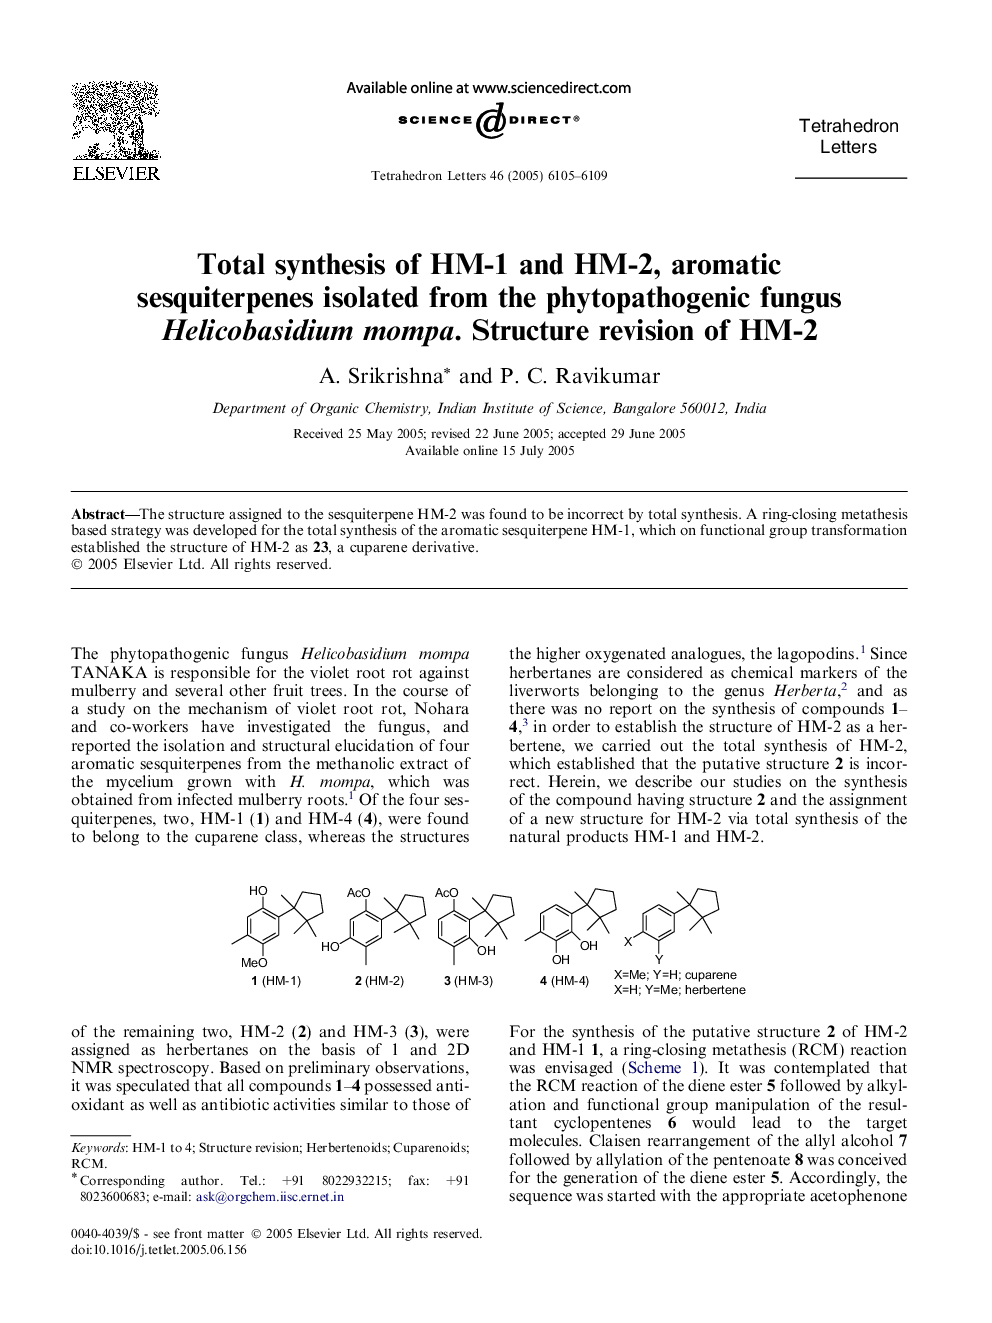 Total synthesis of HM-1 and HM-2, aromatic sesquiterpenes isolated from the phytopathogenic fungus Helicobasidium mompa. Structure revision of HM-2